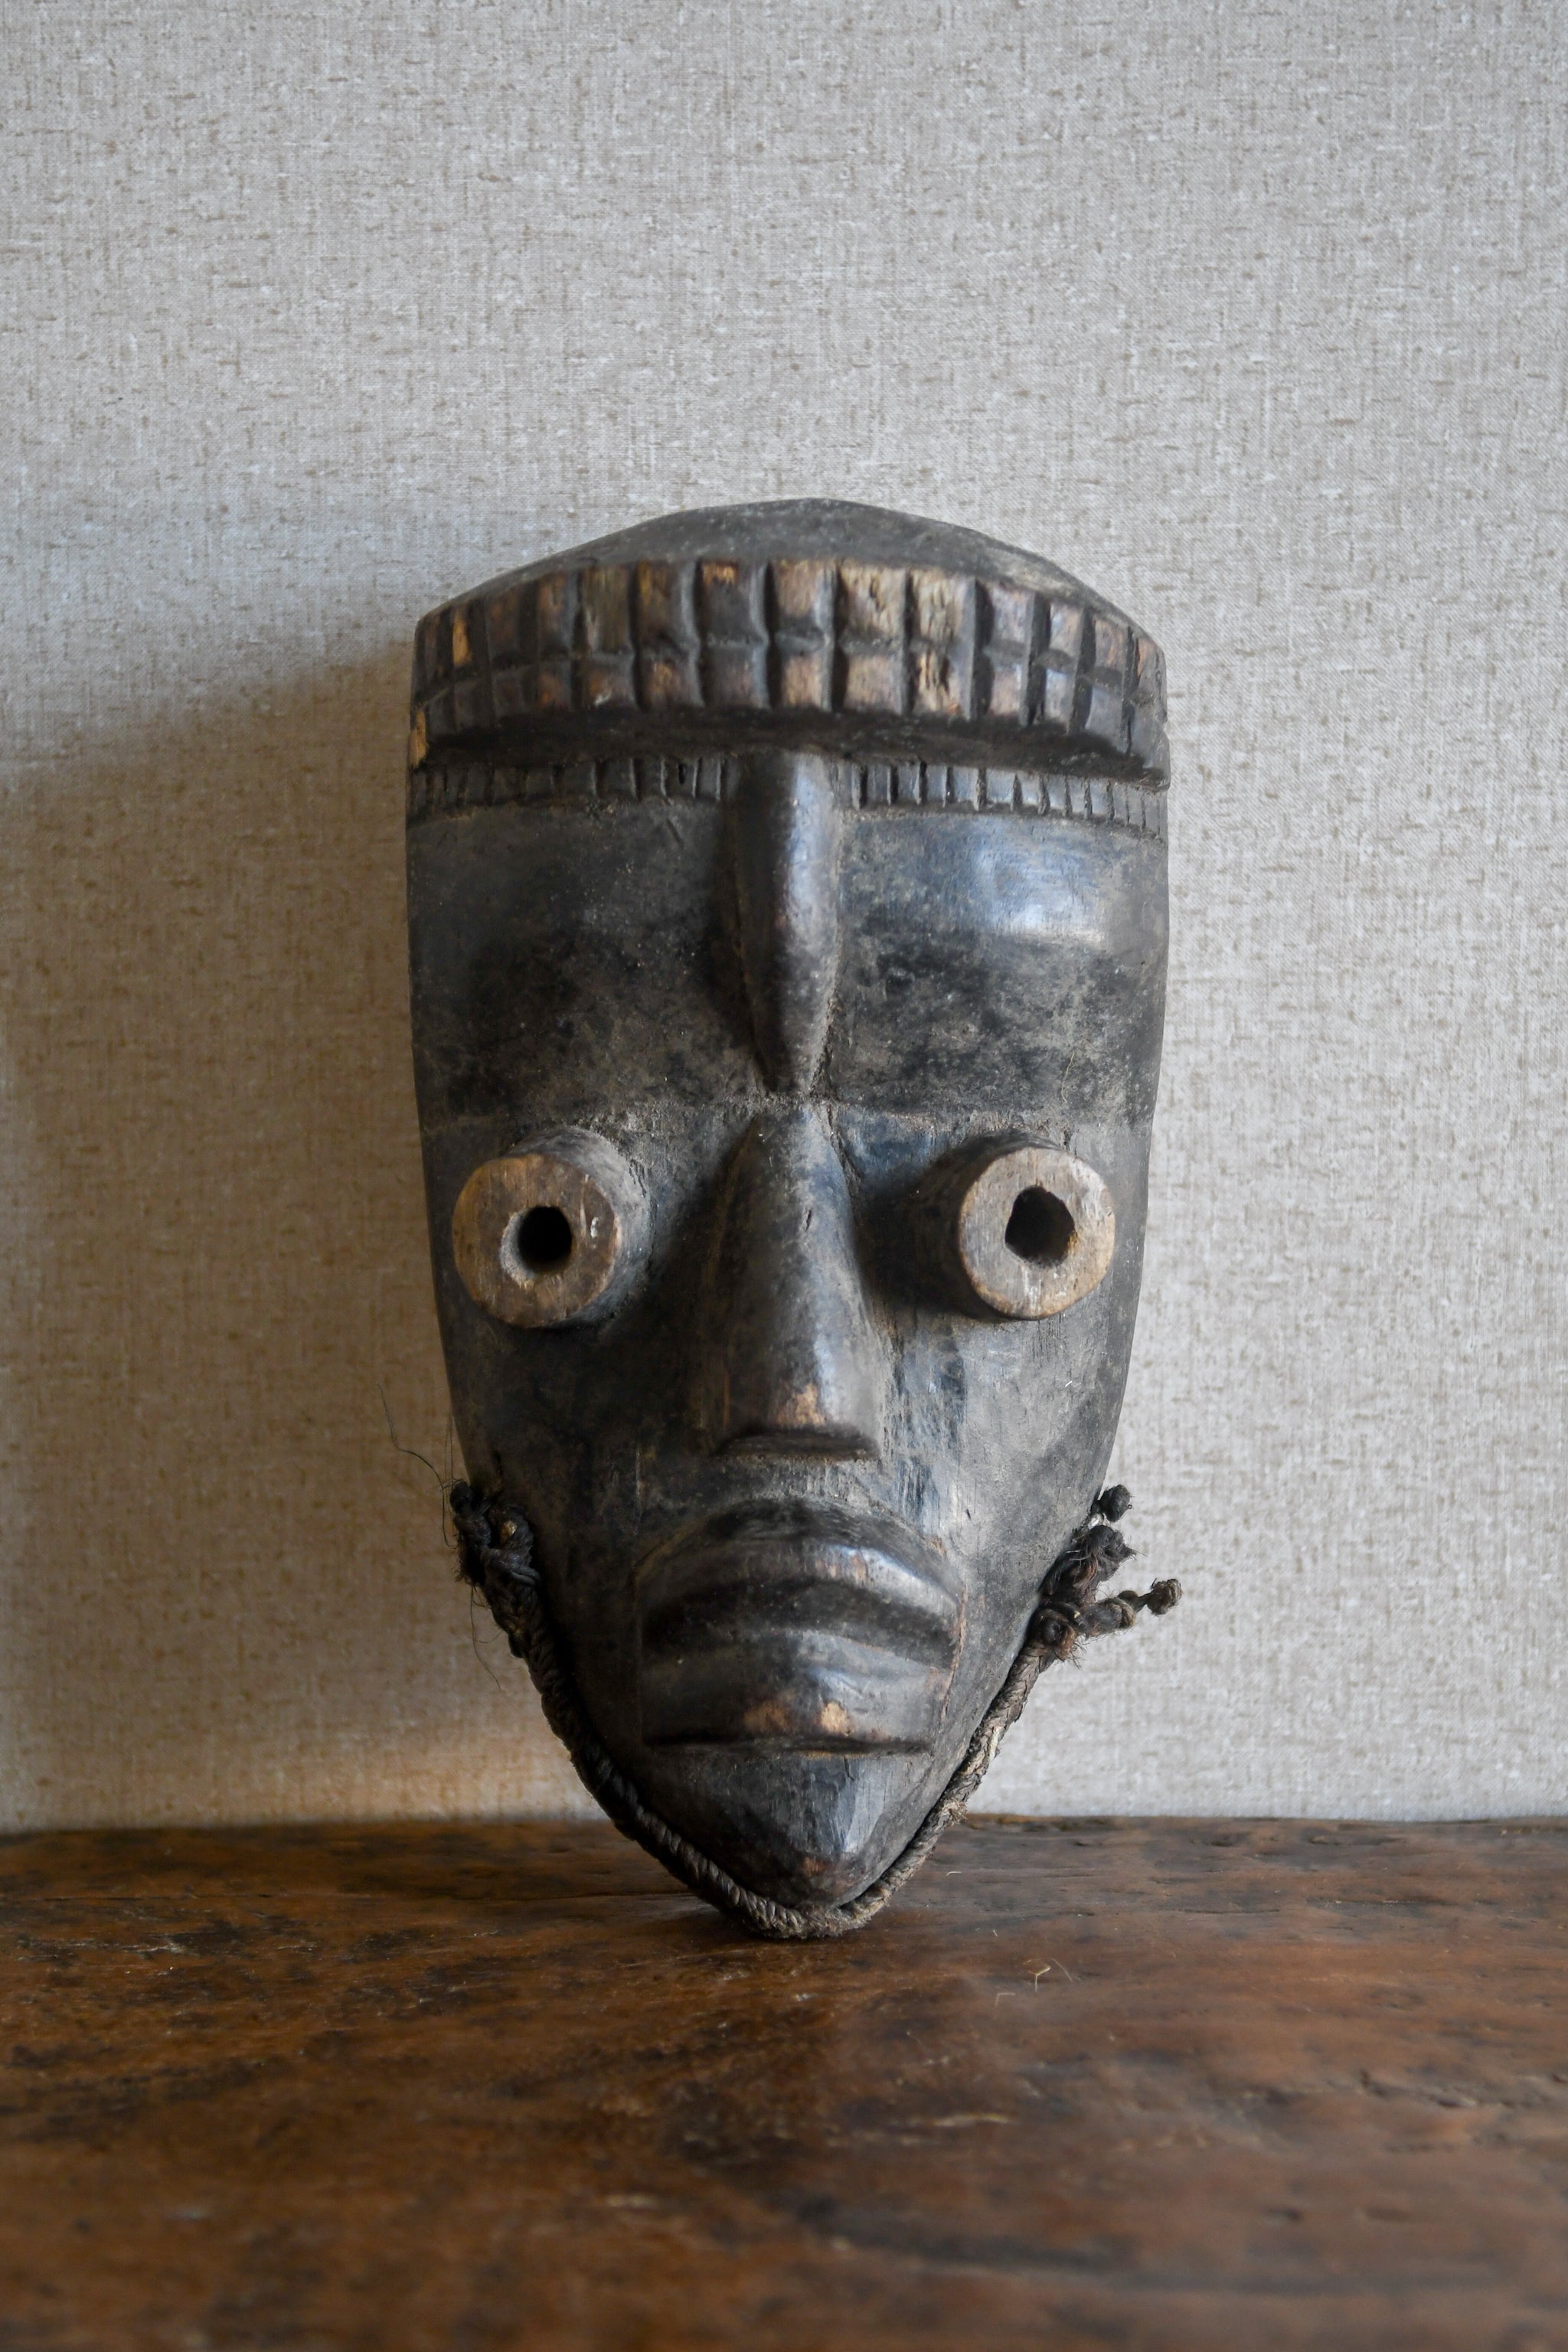 Tribal Masks - Traditional - Folk Art - African - Objects - Artifacts - Sculptures - Collectible - Bete Kran Mask -  Wood - Hand Carved - Ivory Coast - Intricately Detailed - Textured Finish - Statement Piece - Artistry